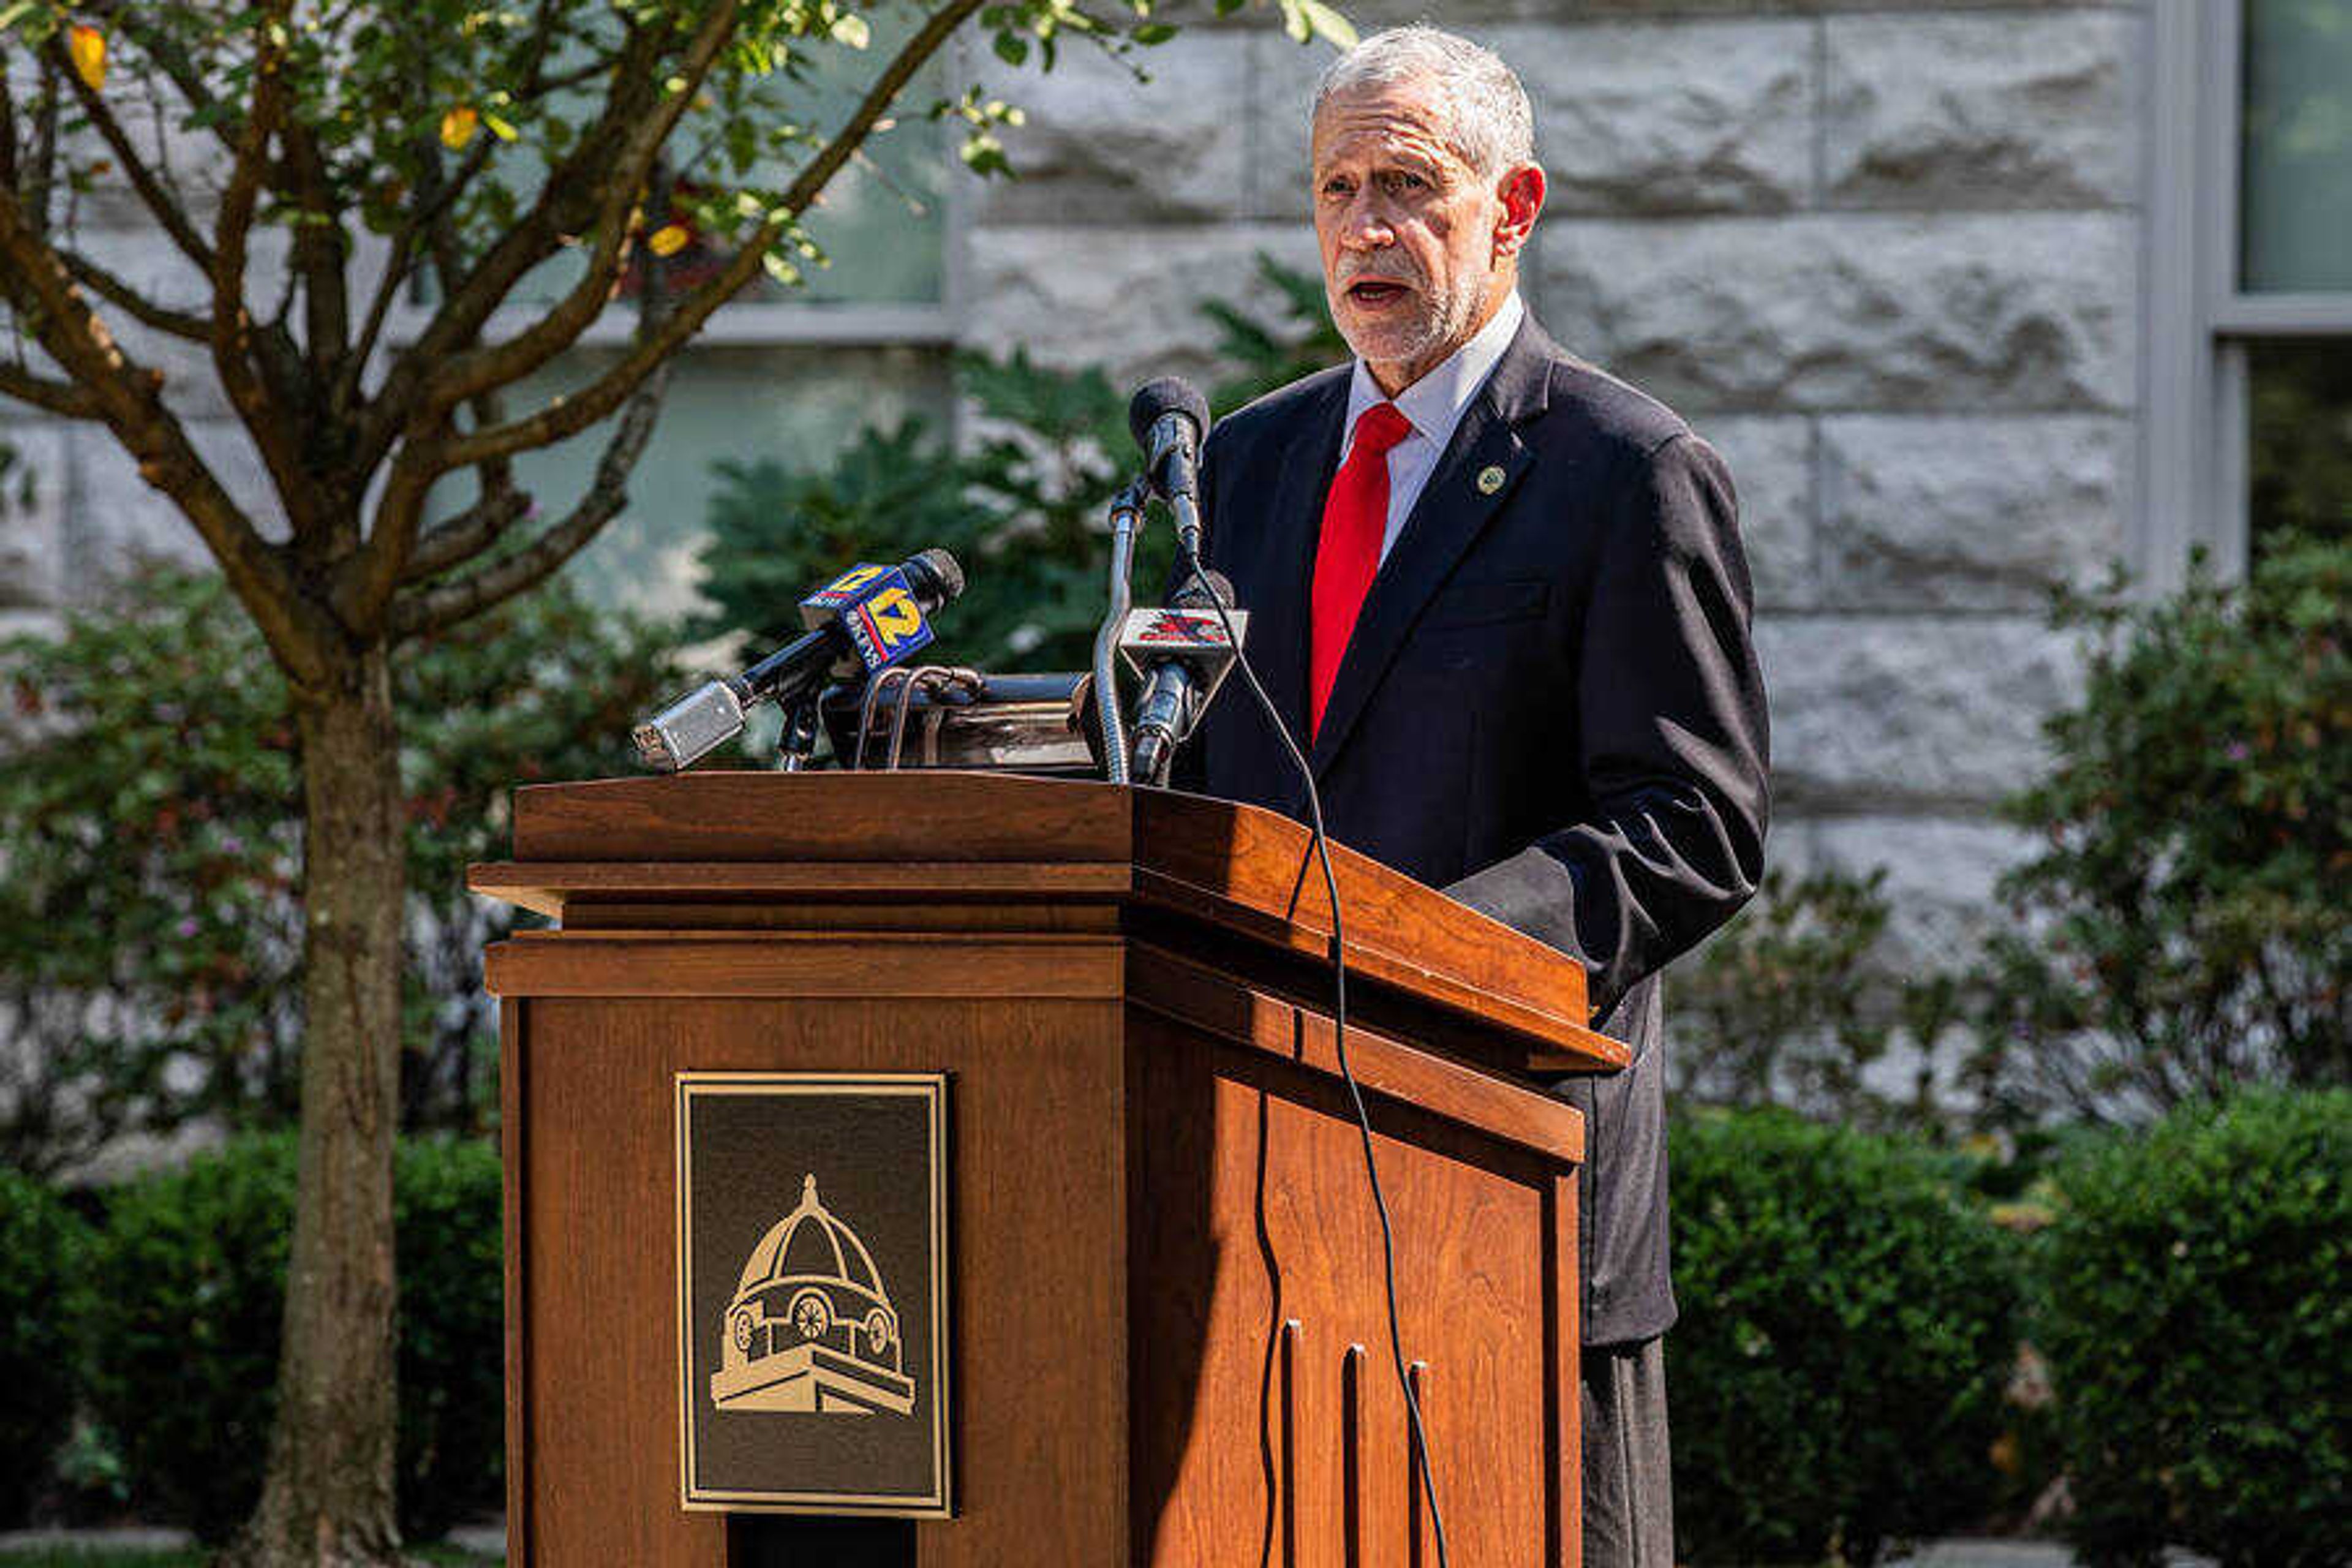 President Carlos Vargas speaks at a press conference outside Academic Hall on Sept. 9.